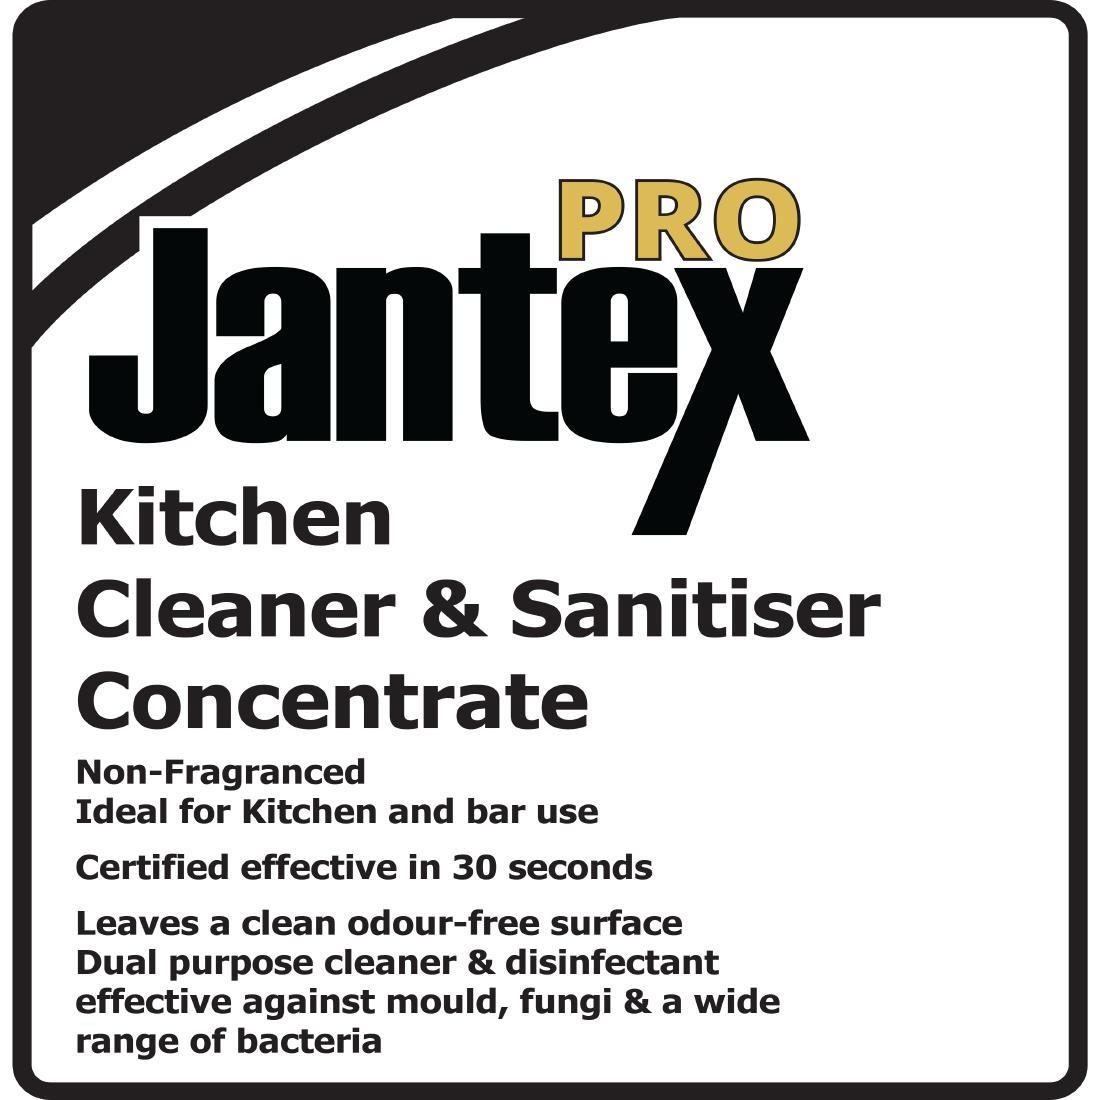 Jantex Pro Kitchen Cleaner and Sanitiser Concentrate 5Ltr - GM986  - 5